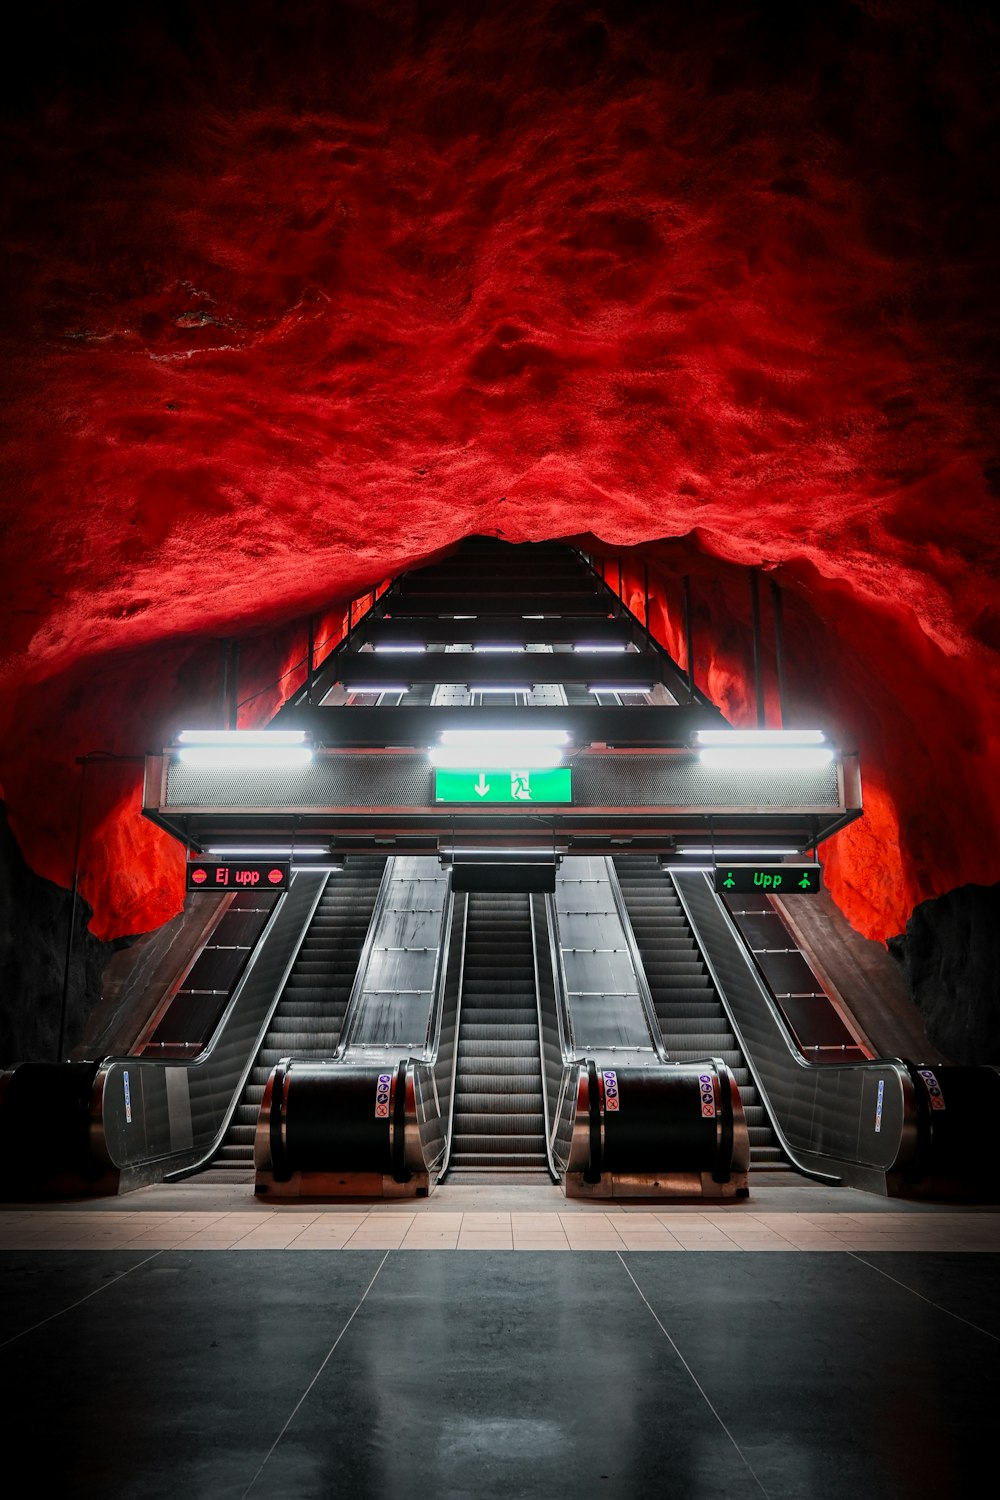 an underground subway station with escalators and red walls